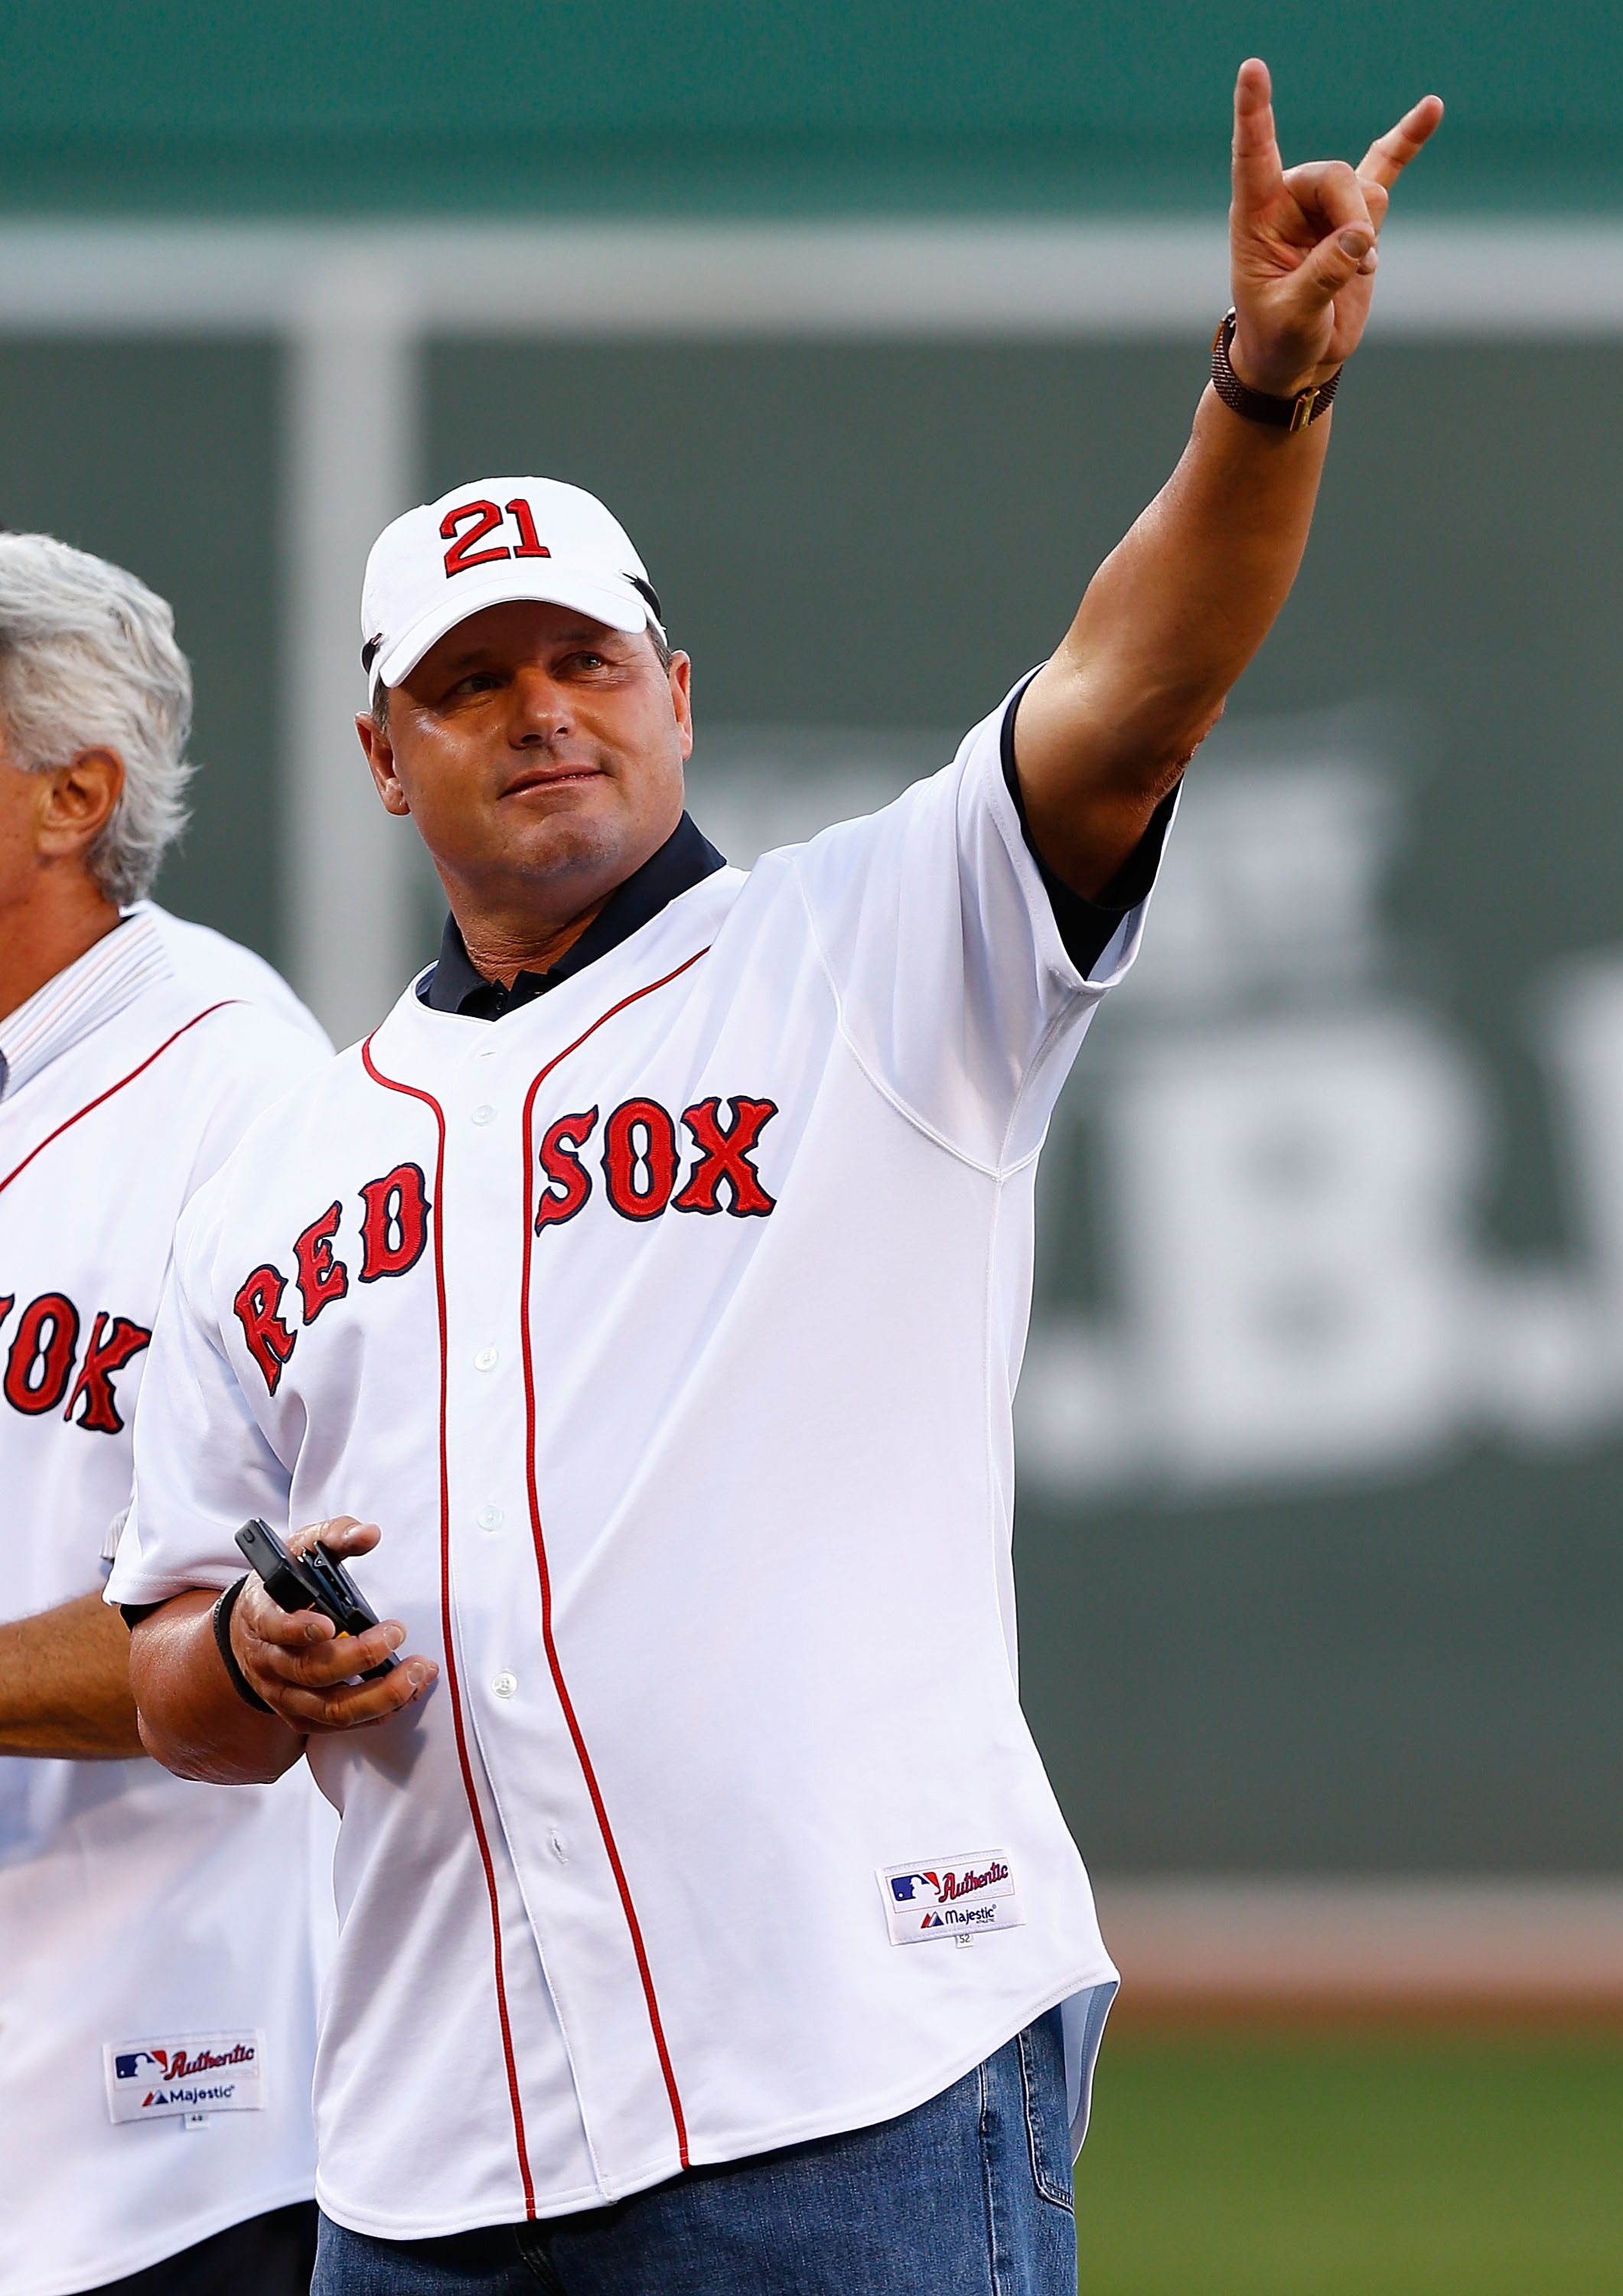 BOSTON, MA - JULY 30: Former Boston Red Sox Roger Clemens acknowledges the crowd while being honored as part of 'Morgan's Magic' team prior to the game between the Boston Red Sox and the Seattle Mariners on July 30, 2013 at Fenway Park in Boston, Massachusetts. (Photo by Jared Wickerham/Getty Images)